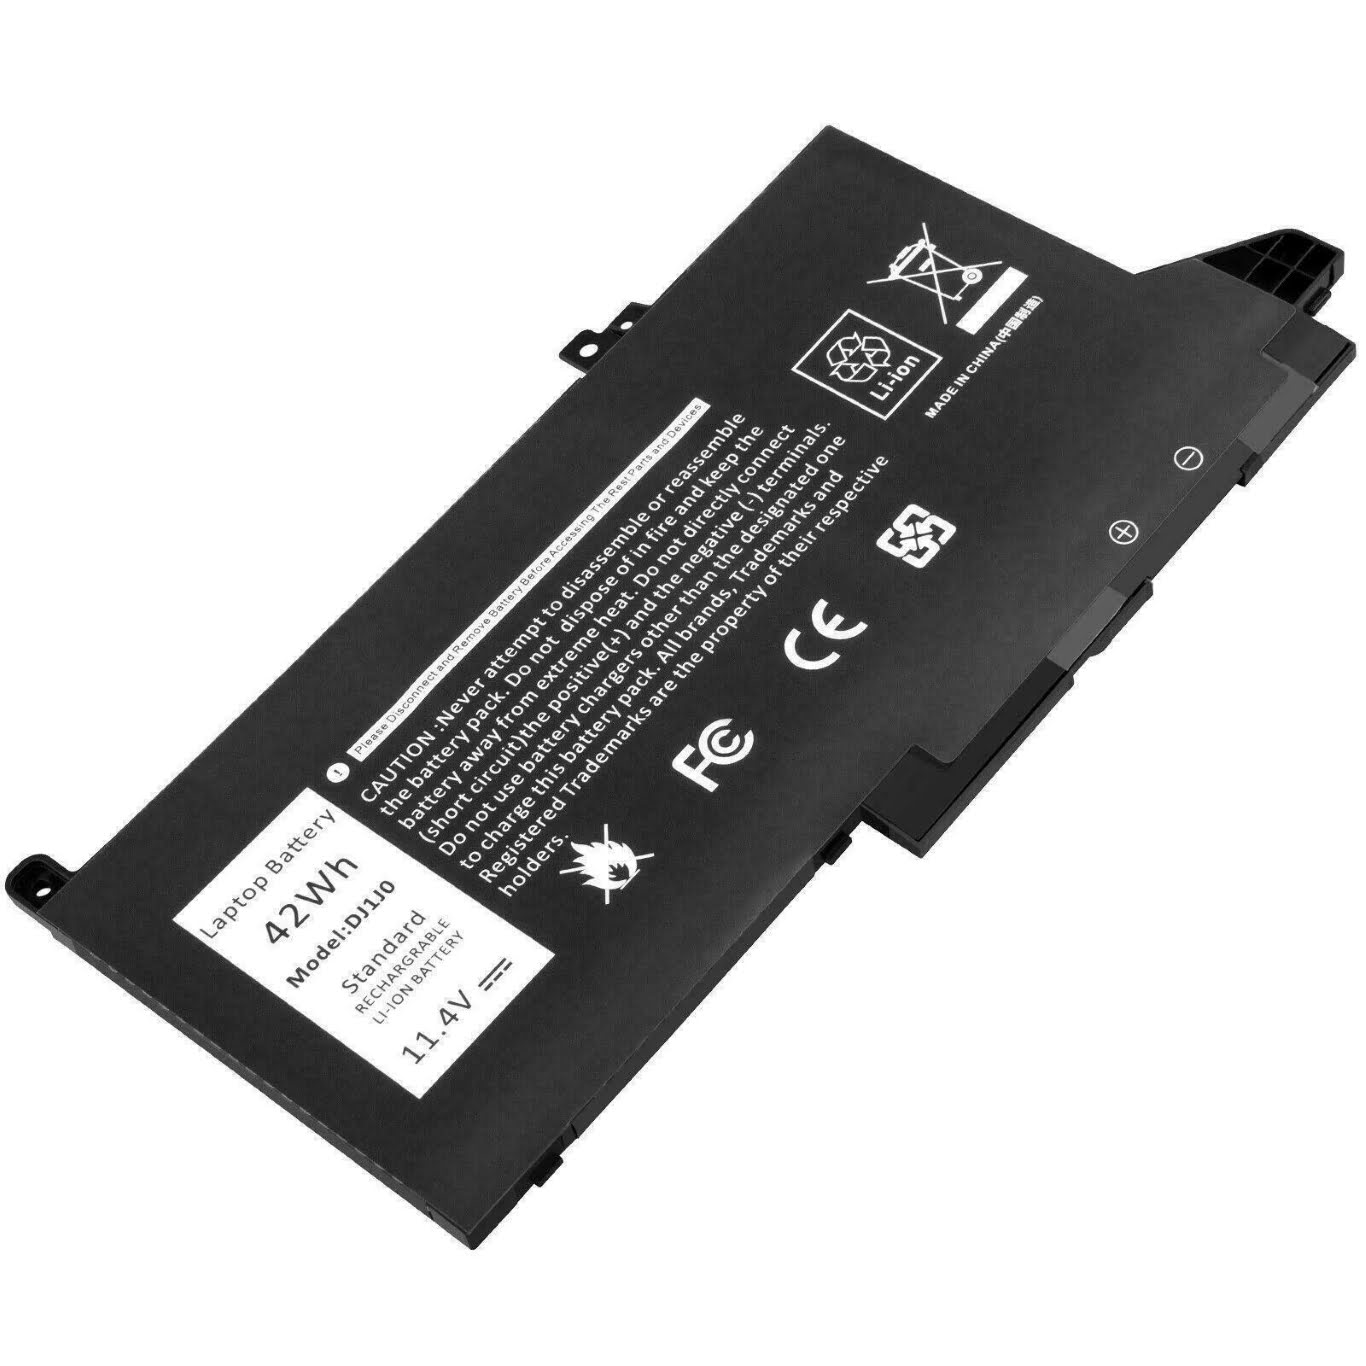 451-BBZL, C27RW replacement Laptop Battery for Dell Latitude 12 7000, Latitude 12 7280, 11.4v, 6 cells, 42wh